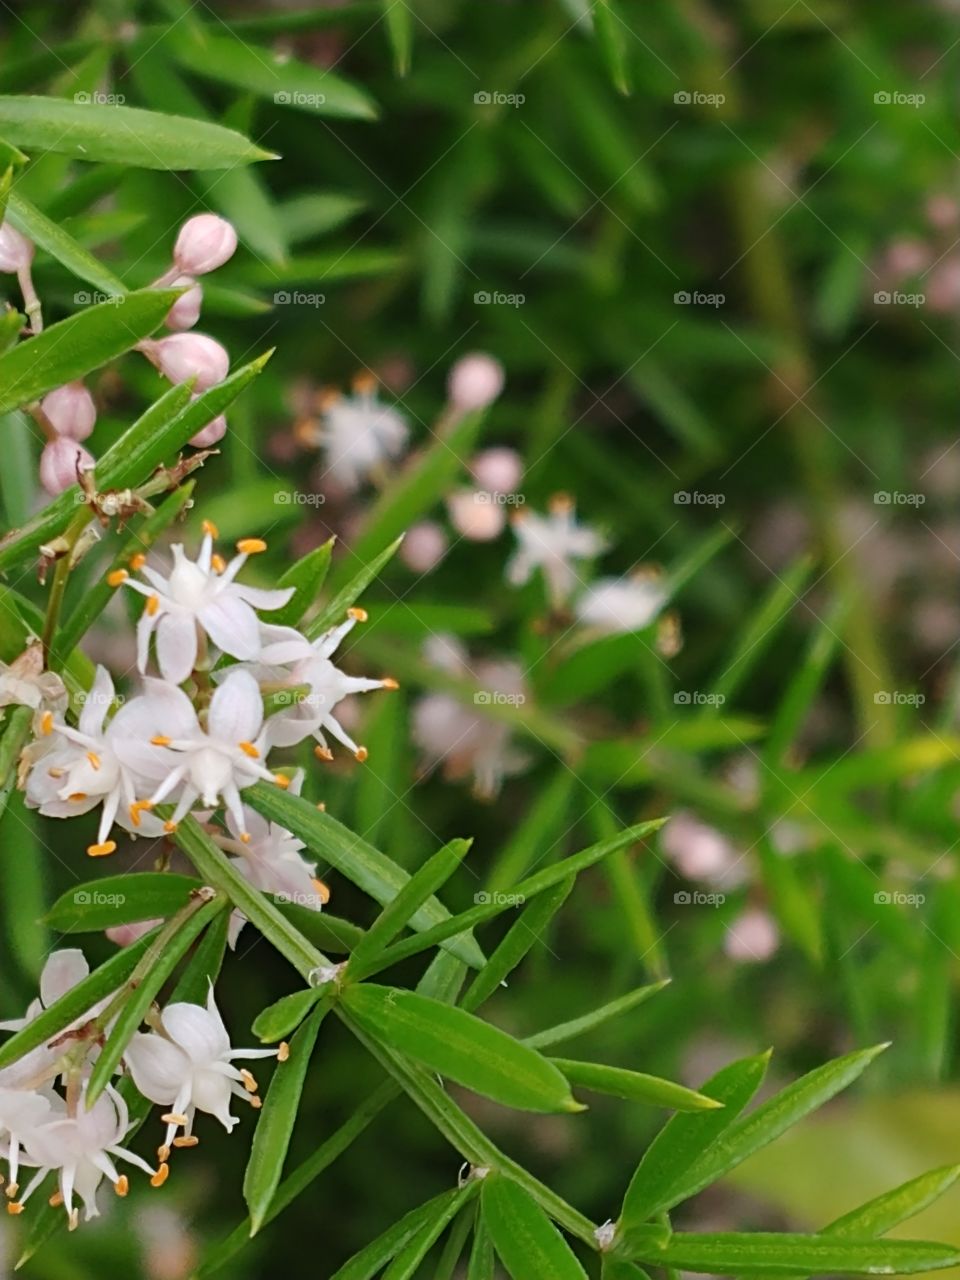 A cluster of small white and yellow flowers with light pink flower buds with the same flowers blurred in the background and green leaves all around them.